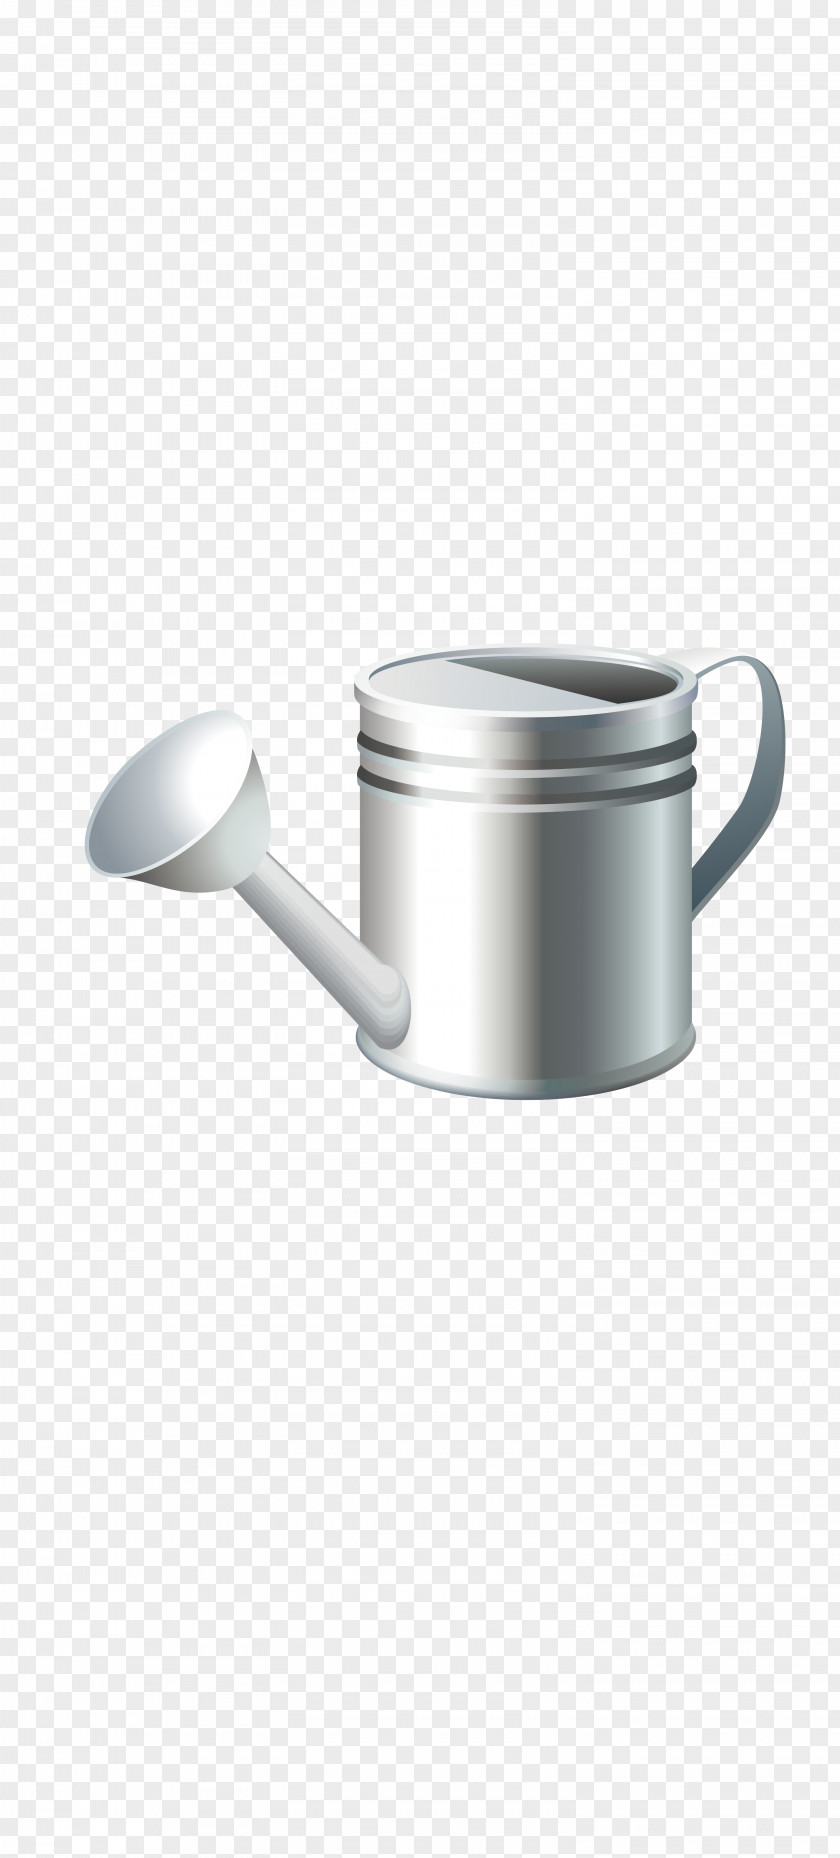 Kettle Vector Material Water Bottle PNG